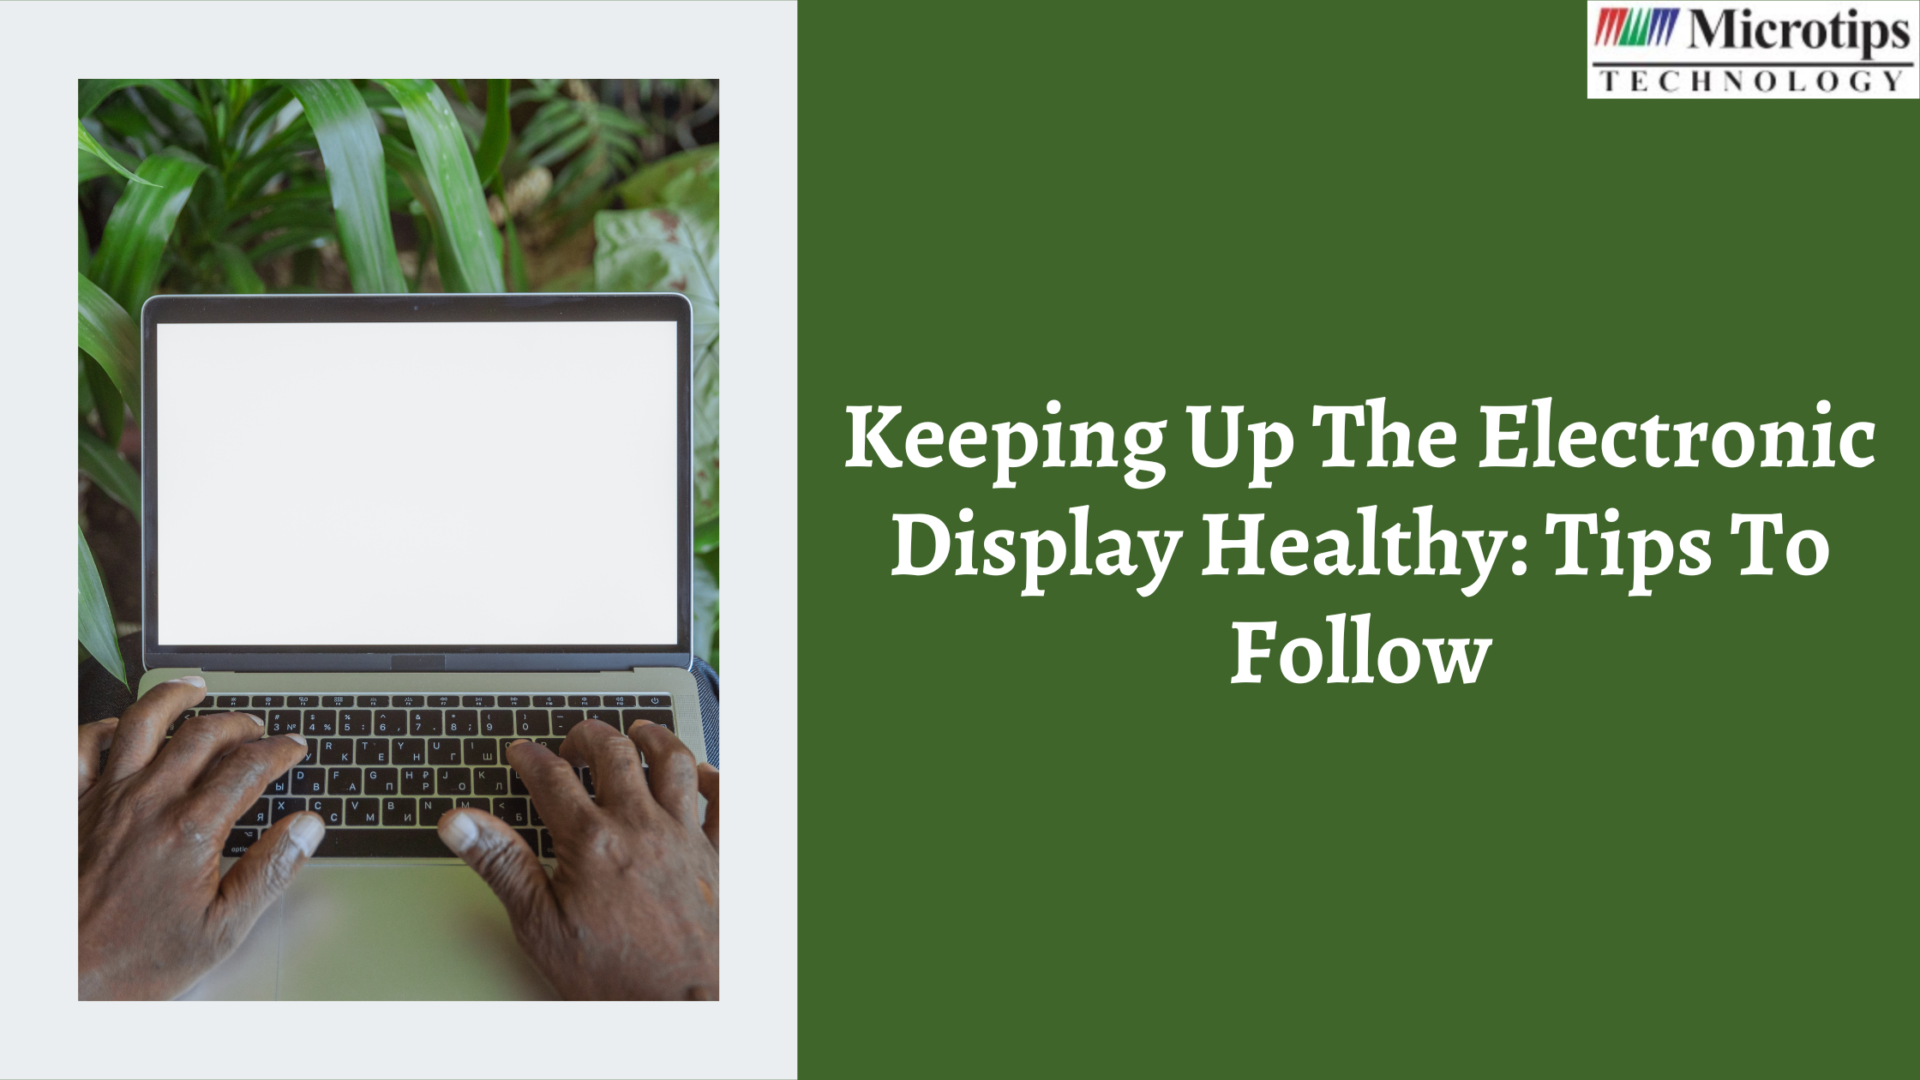 cropped Keeping Up The Electronic Display Healthy Tips To Follow 2